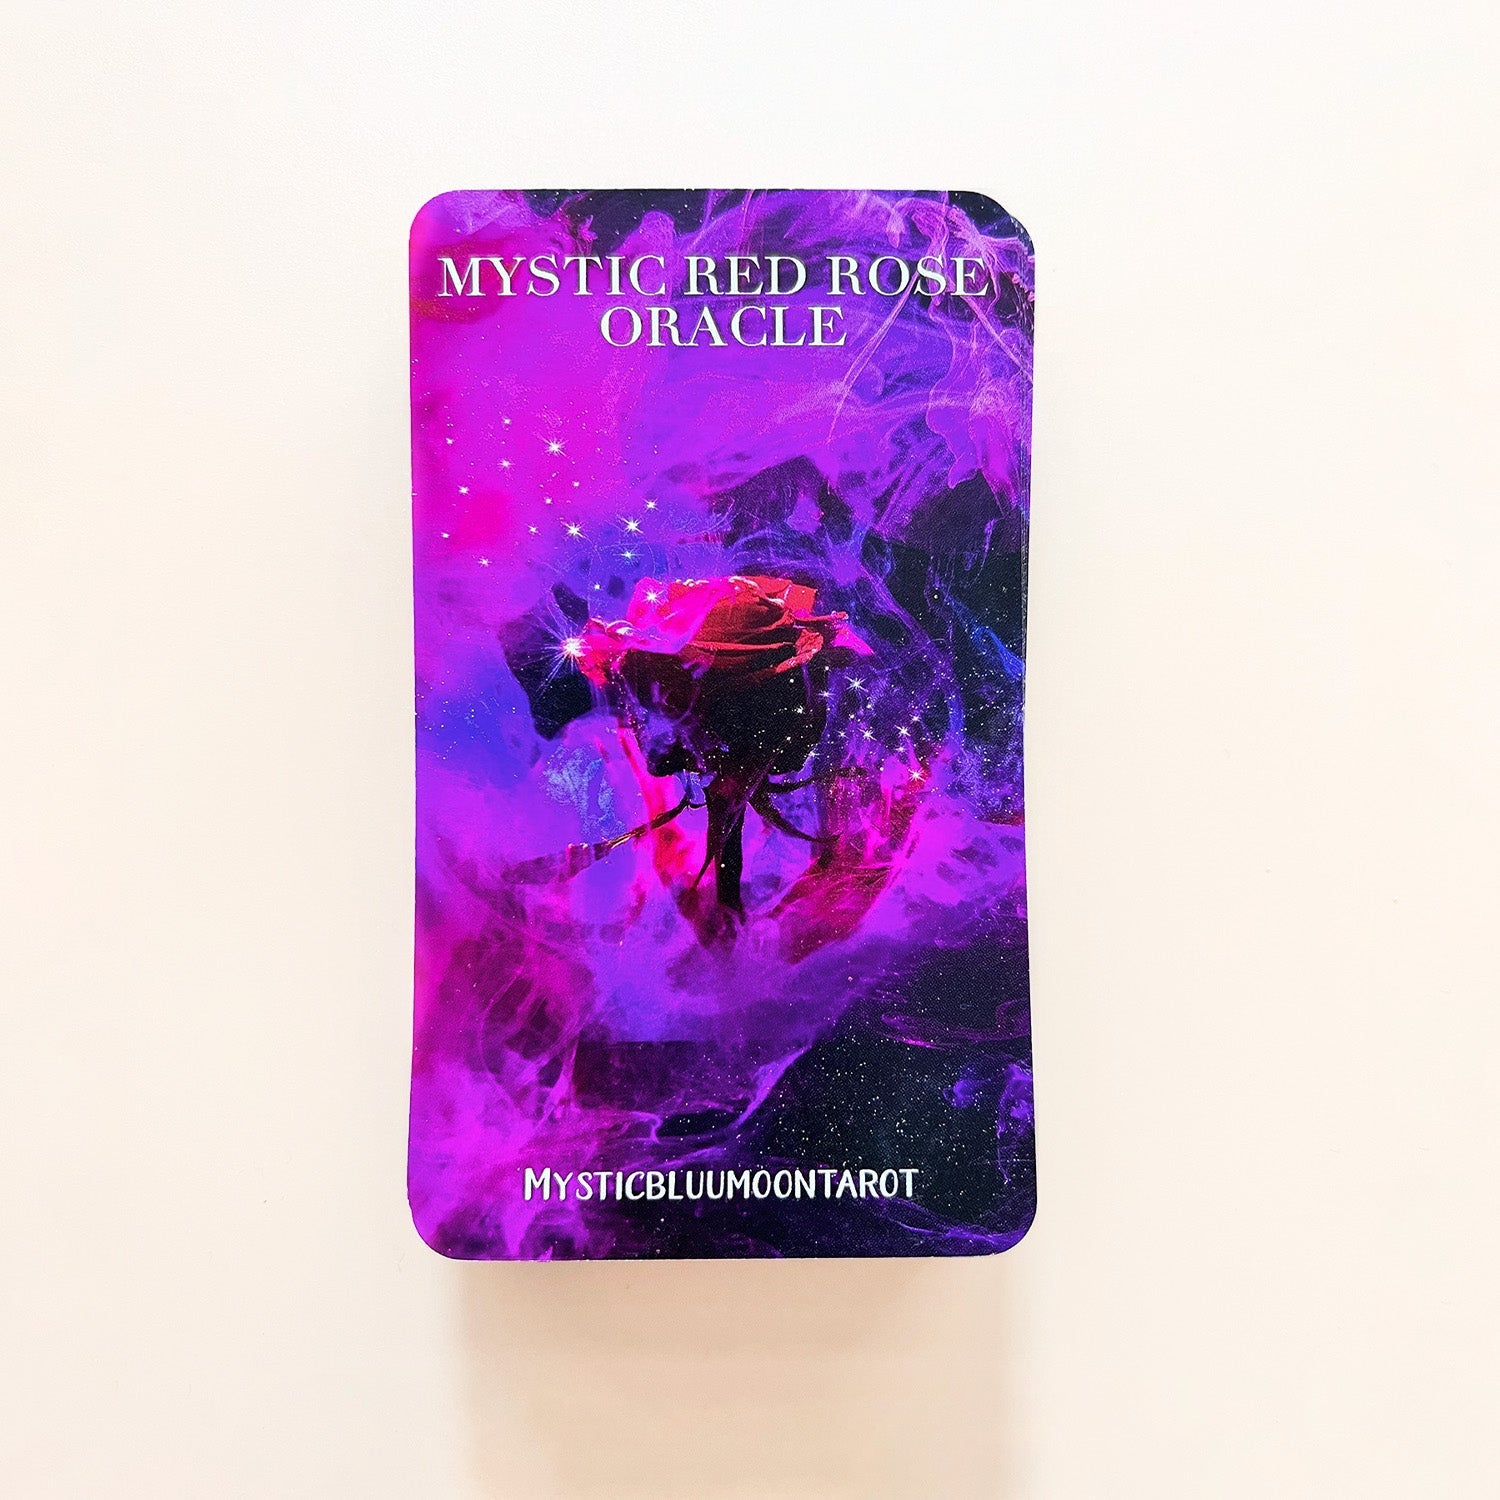 Mystic Red Rose Oracle Deck | Situations Deck - MysticBluuMoonTarot